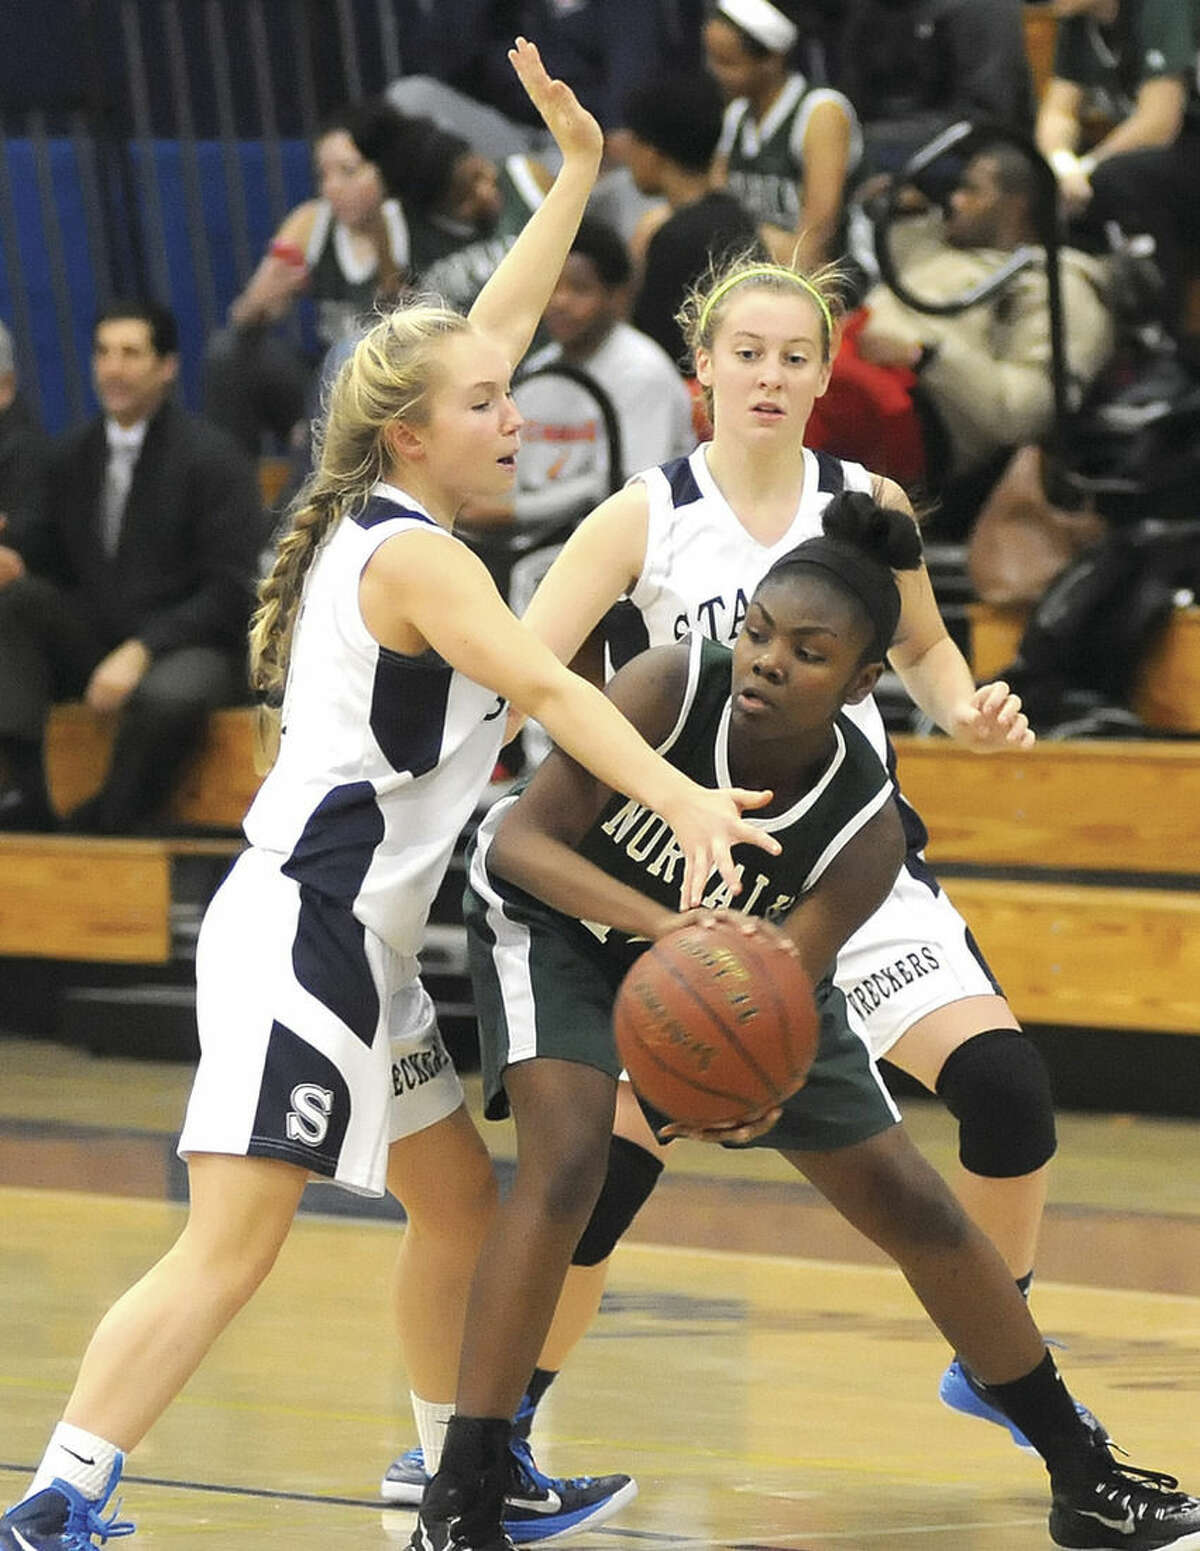 Hour photo/John Nash Norwalk's Asiah Knight, center, is trapped by Staples' Olivia Troy, left, and Tessa Mall, rear, during Wednesday's season-opening FCIAC girls basketball game in Westport. Staples won, 43-38.